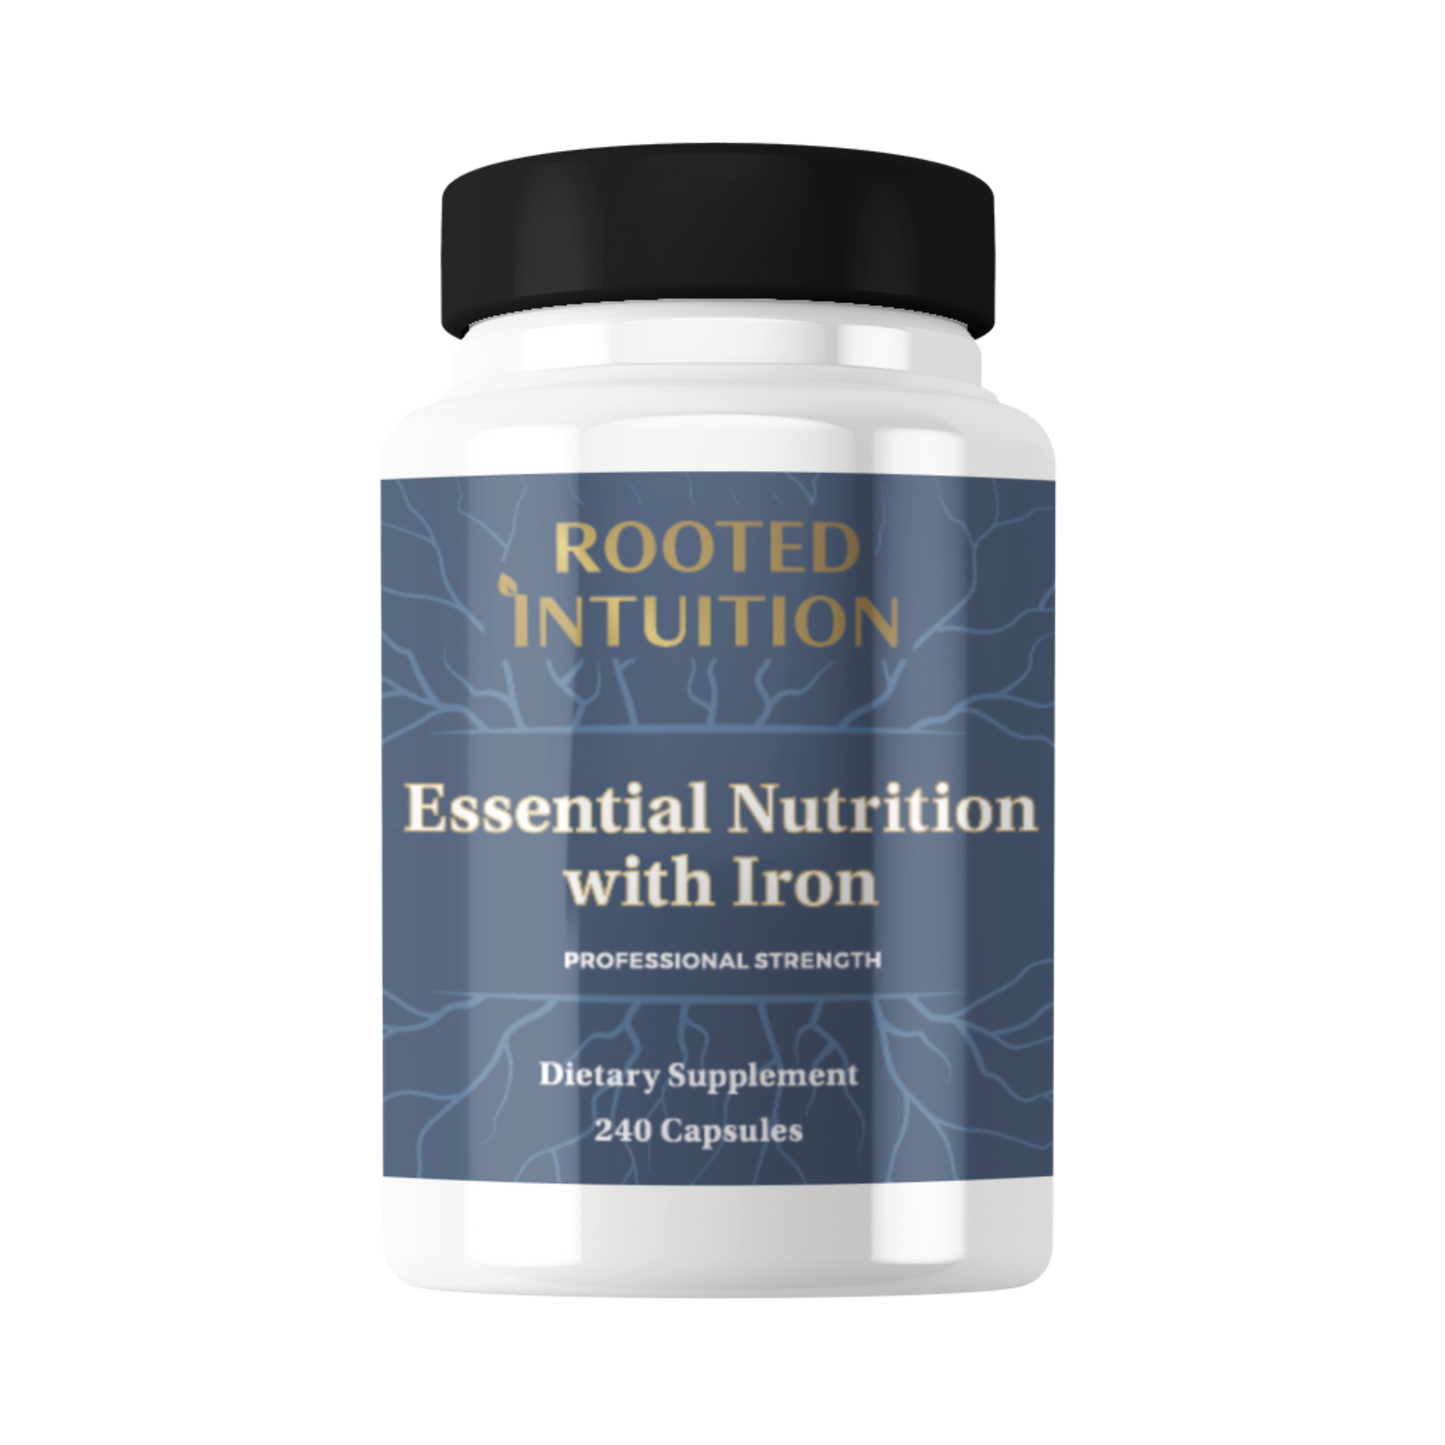 Essential Nutrition with Iron